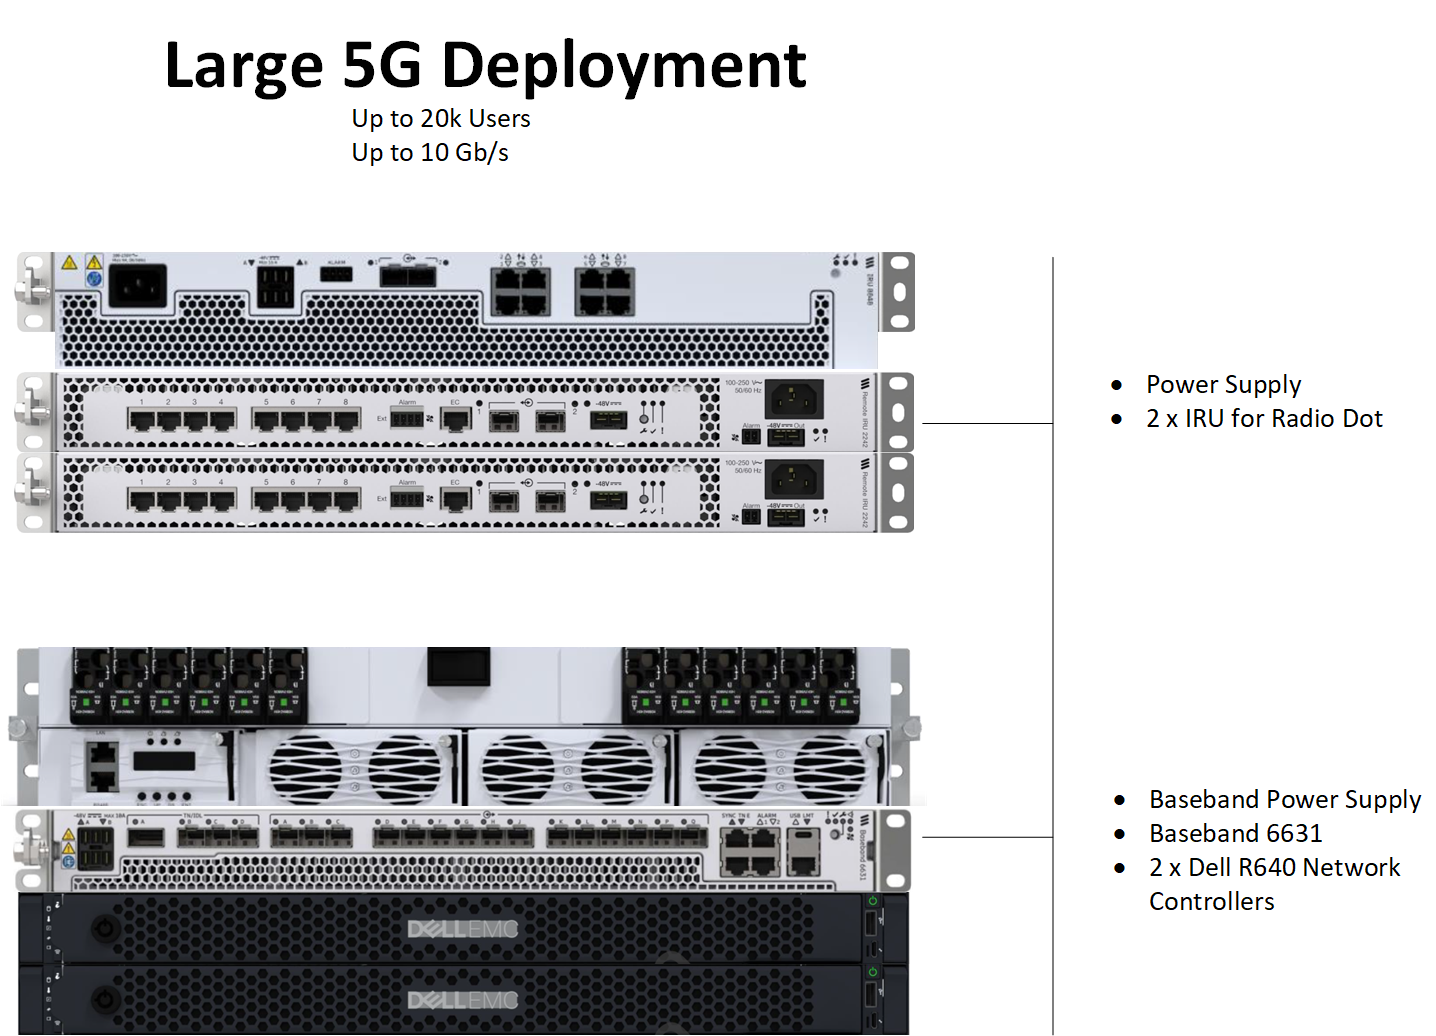 This diagram shows the components included in the Ericsson private 5G stack.